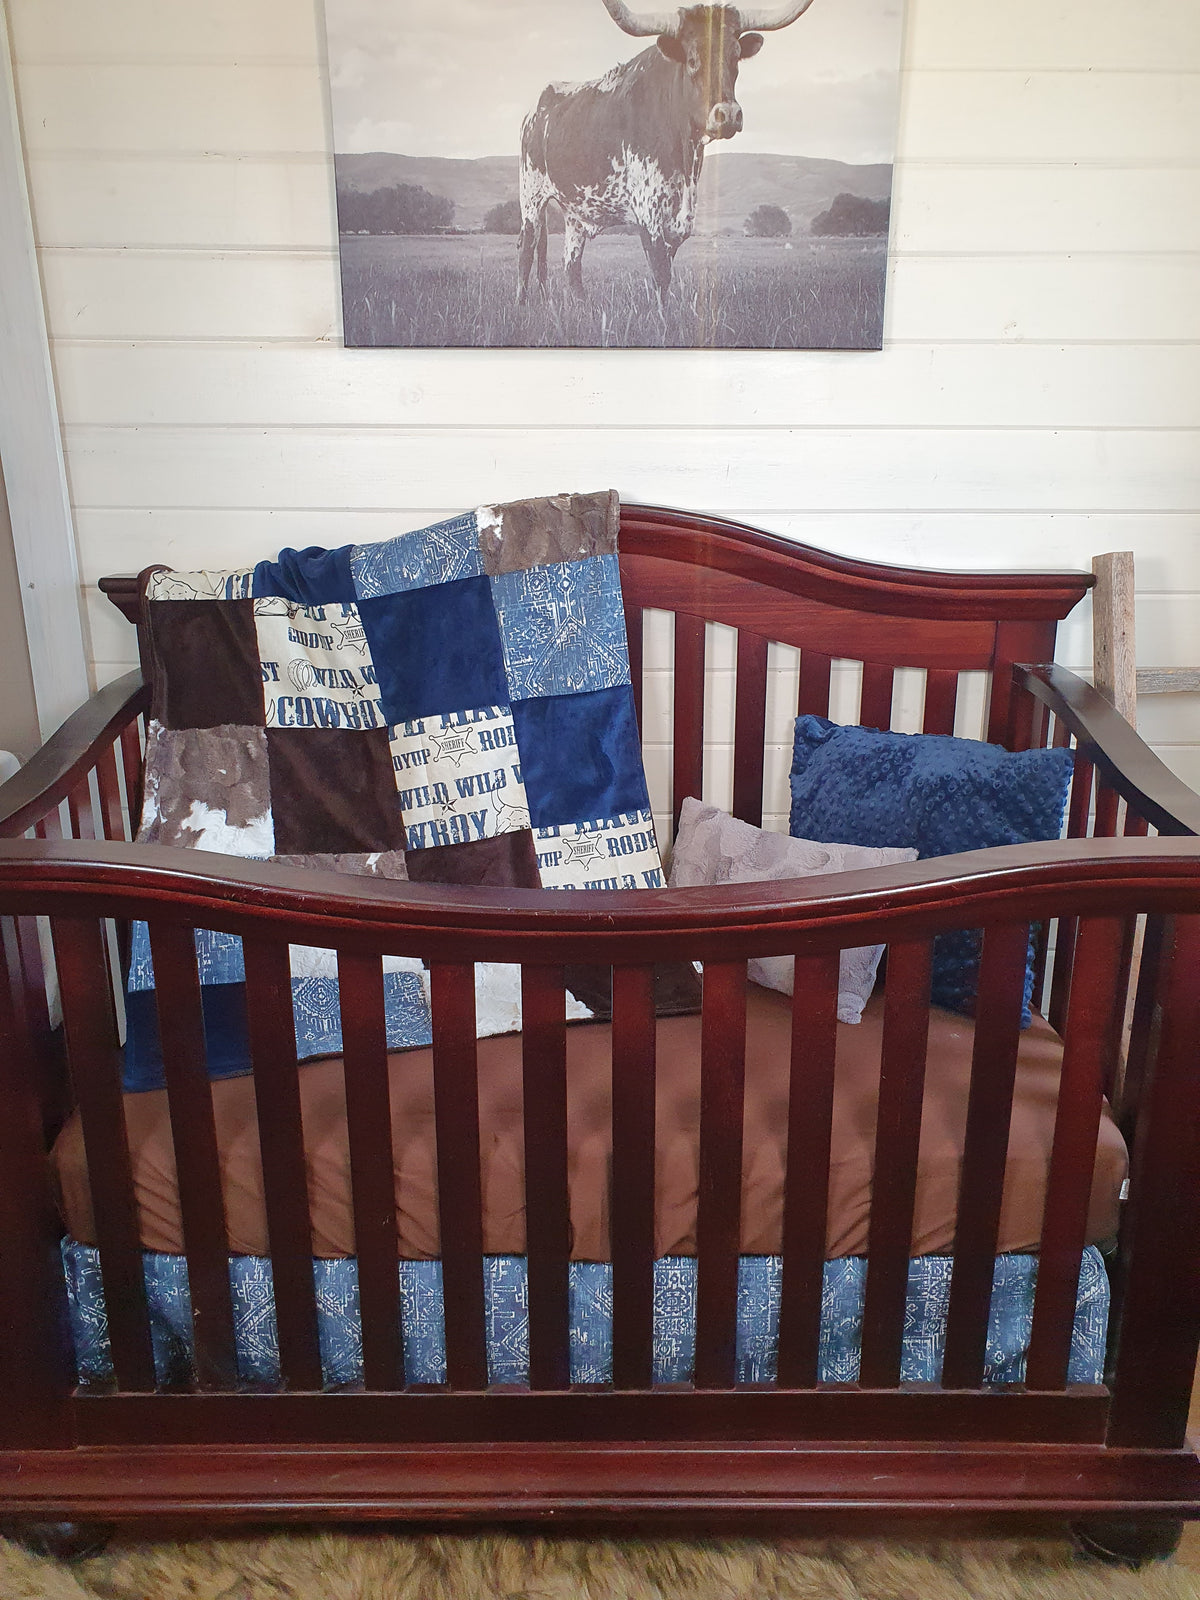 New Release Boy Crib Bedding- Cowboy and Navy Aztec Western Baby Bedding &amp; Nursery Collection - DBC Baby Bedding Co 